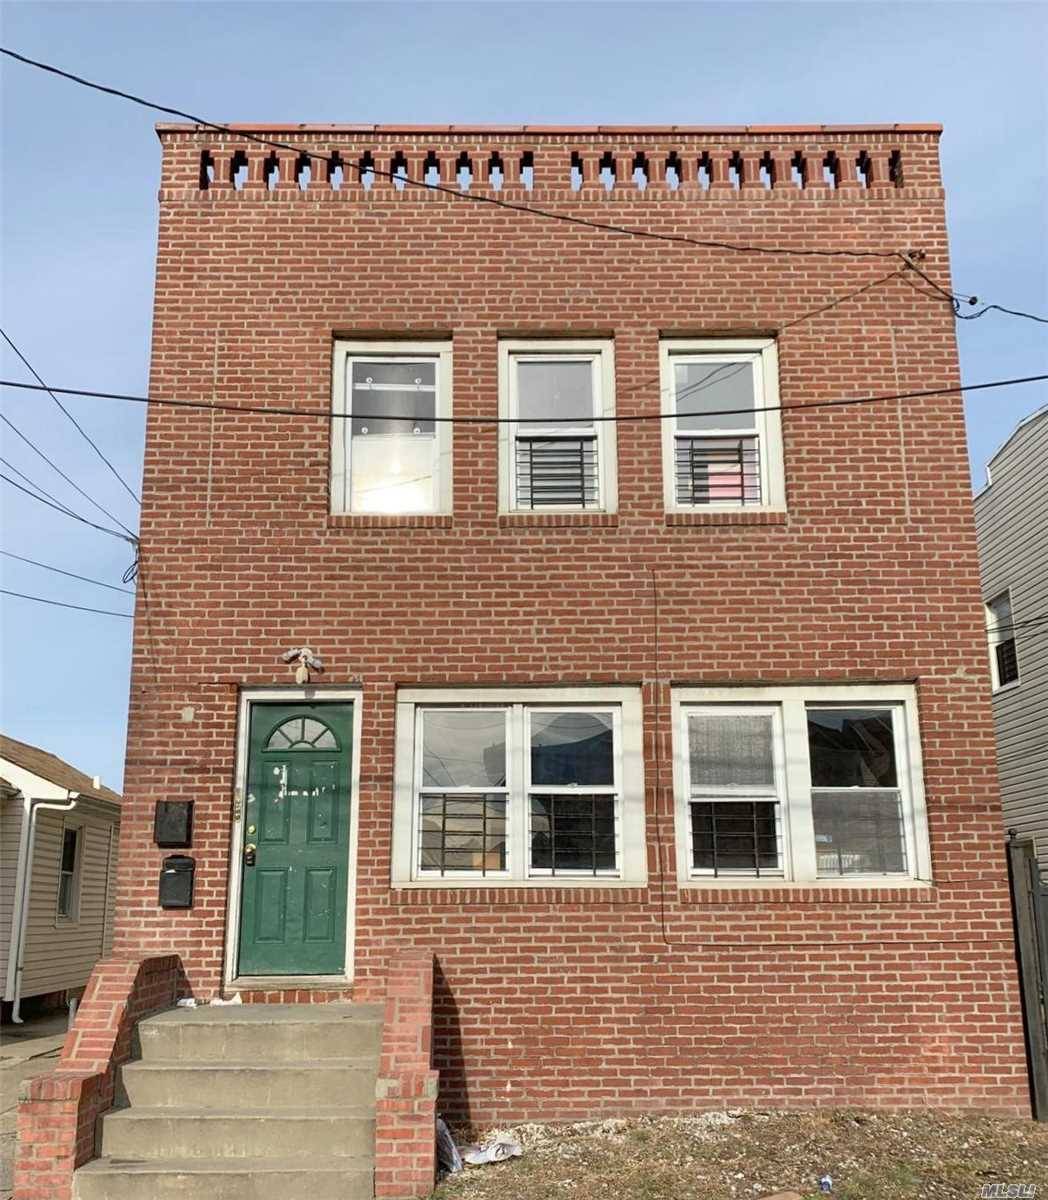 Detached Three Family House With Fully Finished Basement And Detached Two Car Garage Located In The Laurelton Section Of Queens County.